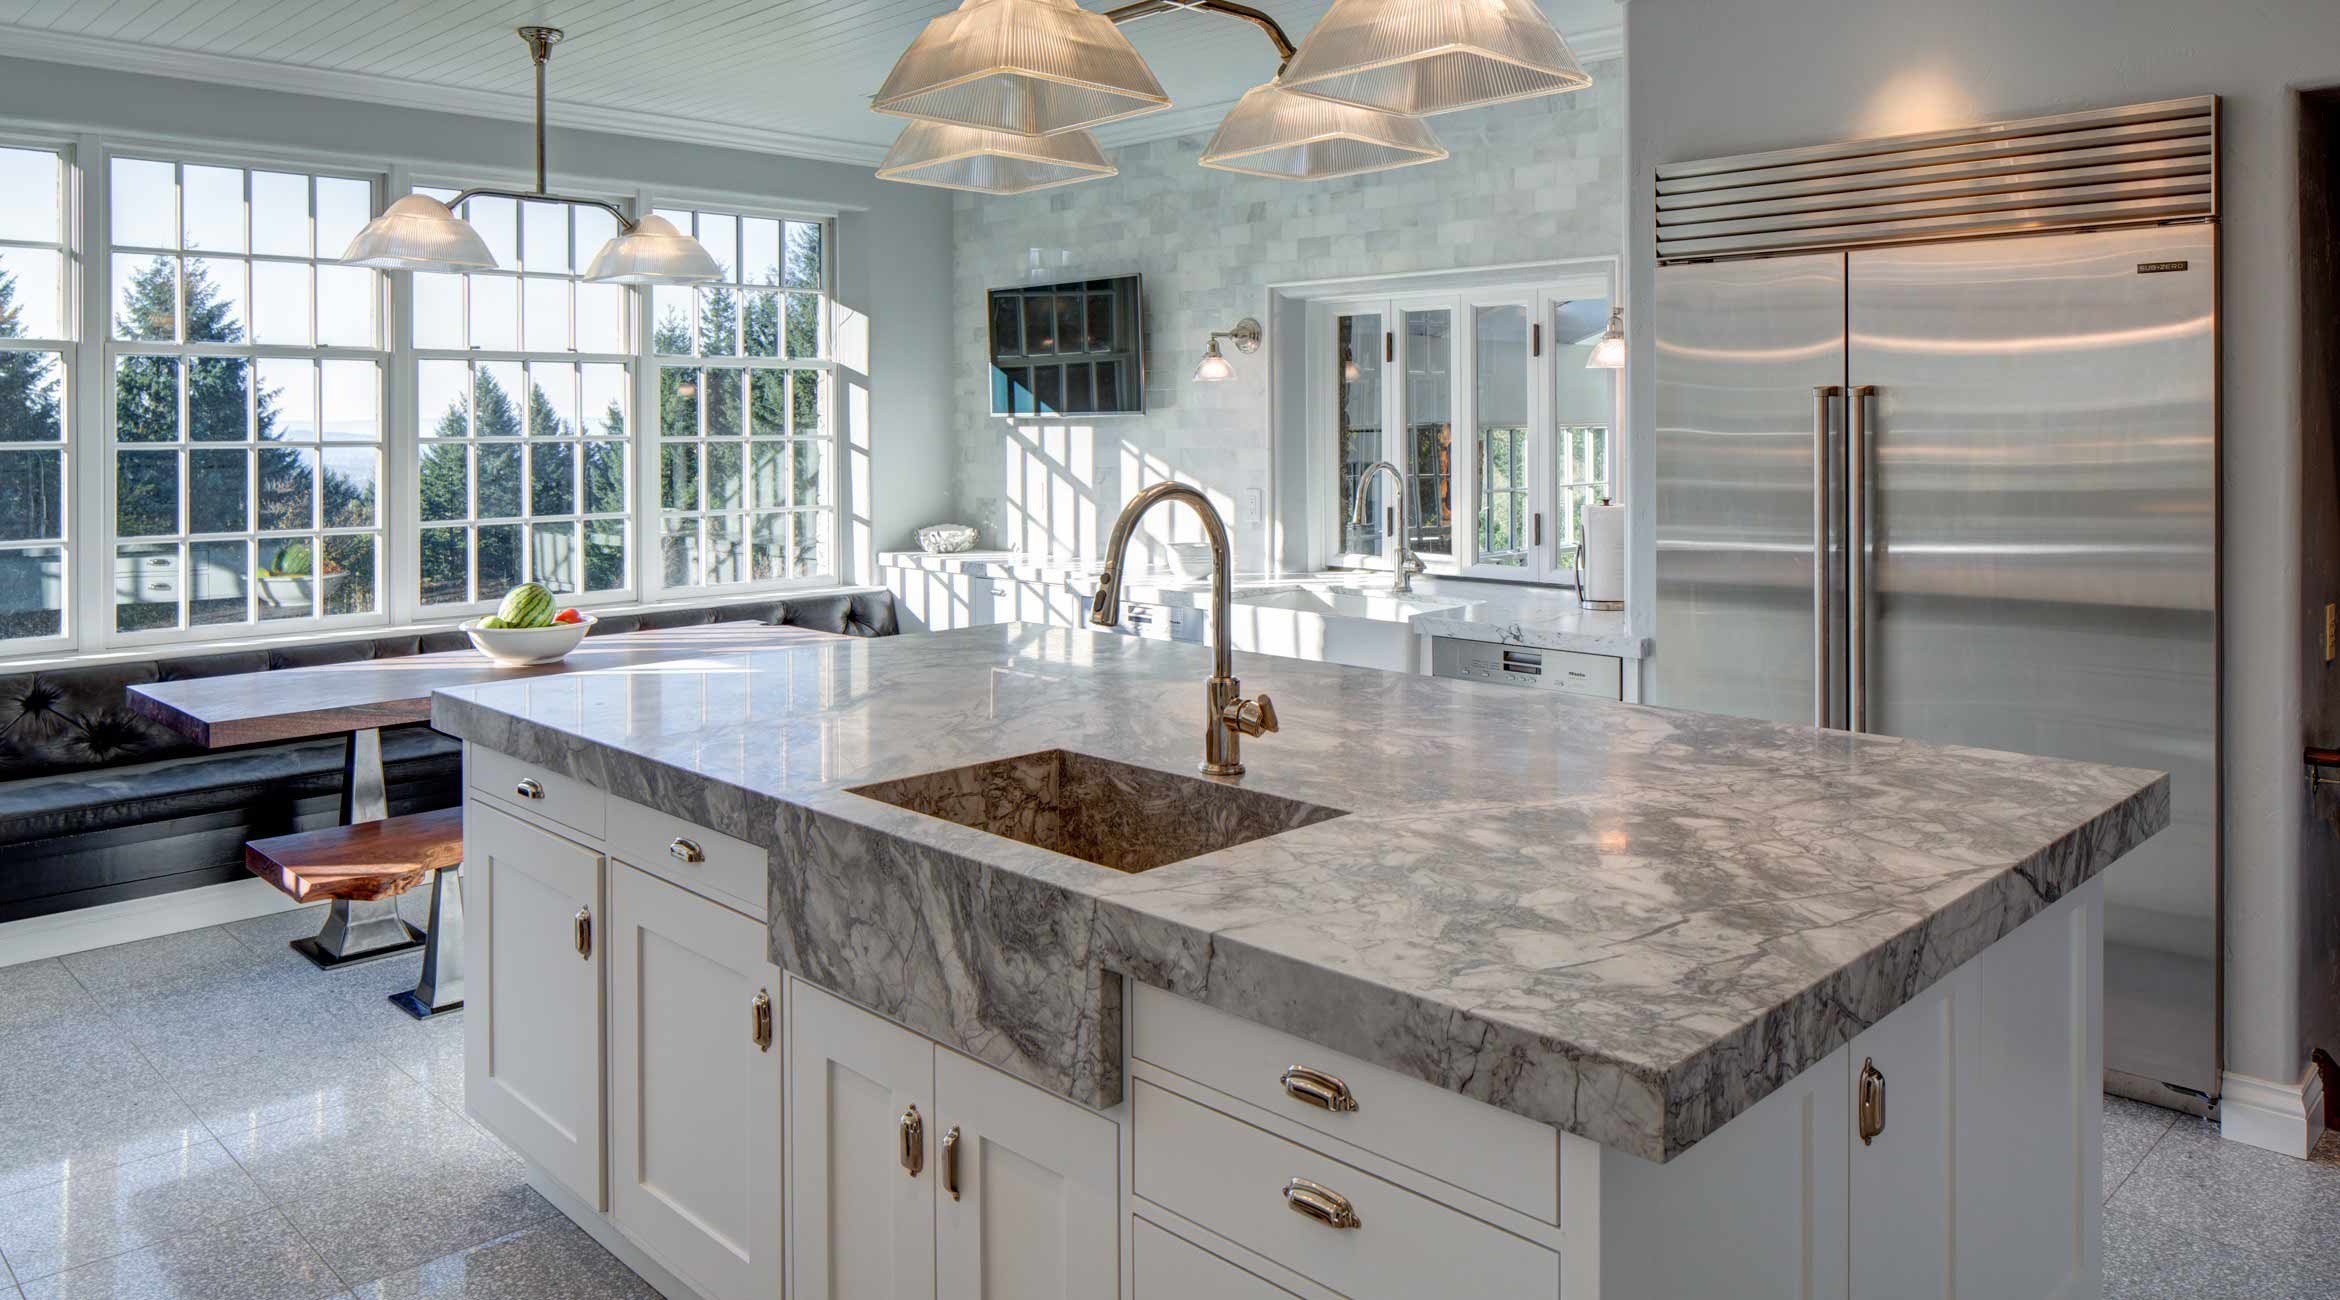 7 Most Popular Countertop Materials For Kitchen Remodels